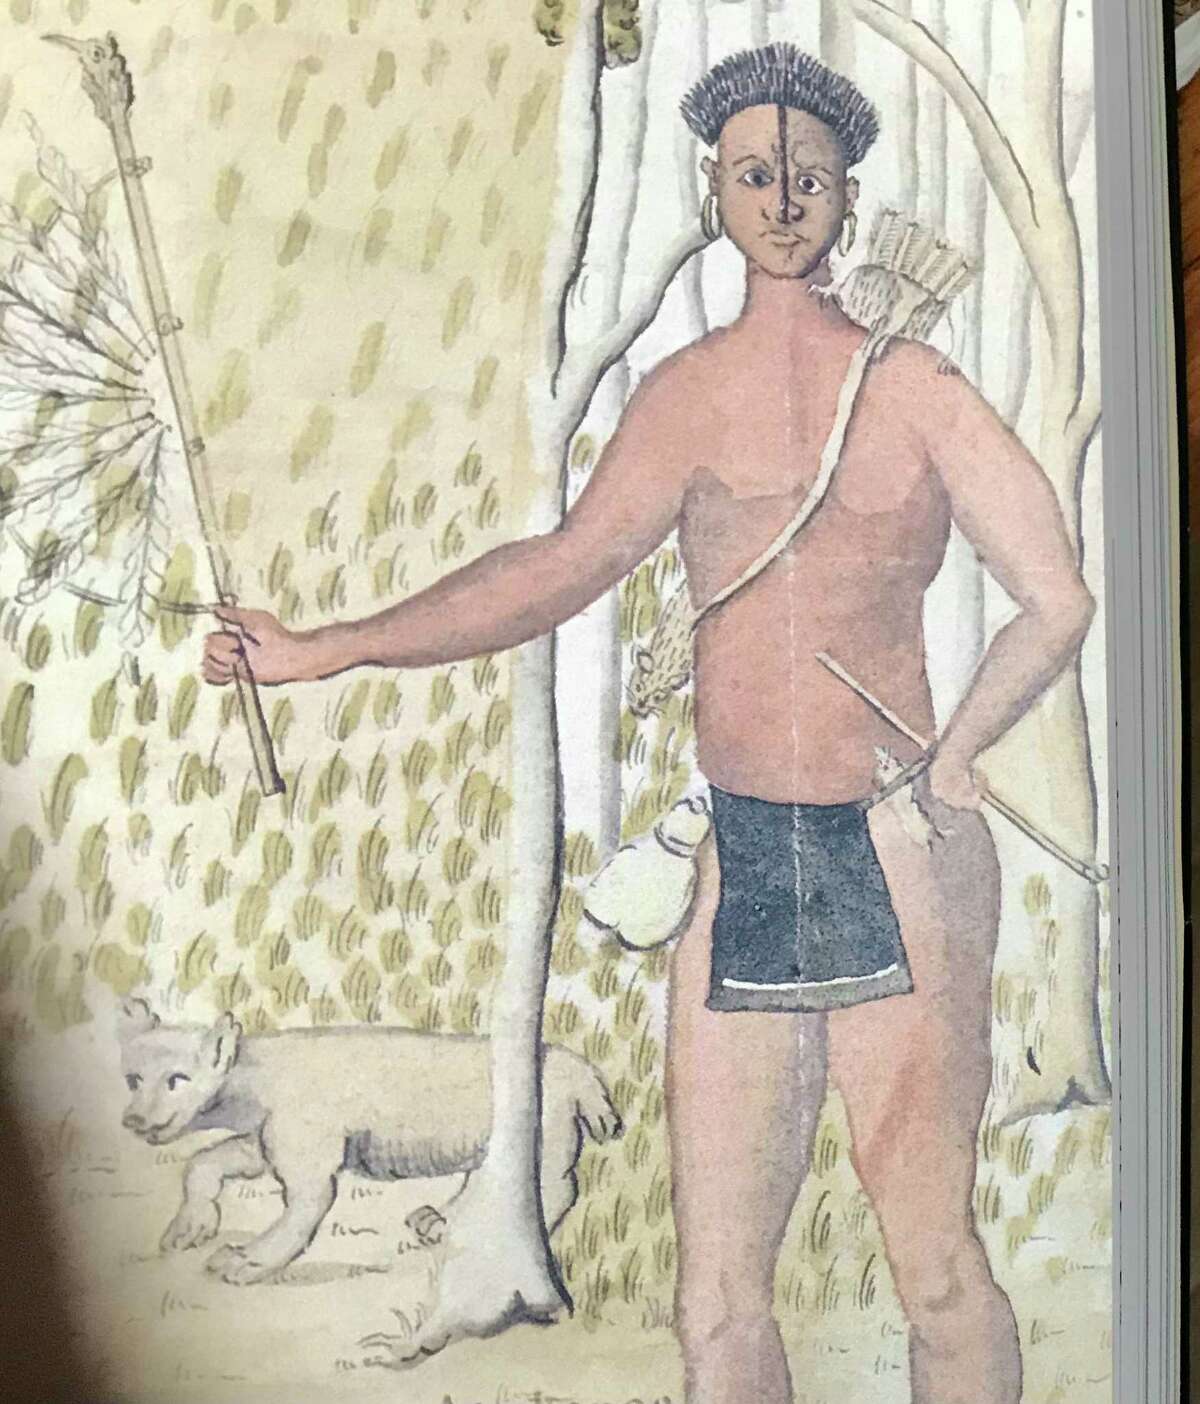 The only known image painted from life of an Atakapa warrior is part of a watercolor by Alexandre DeBatz in 1735.